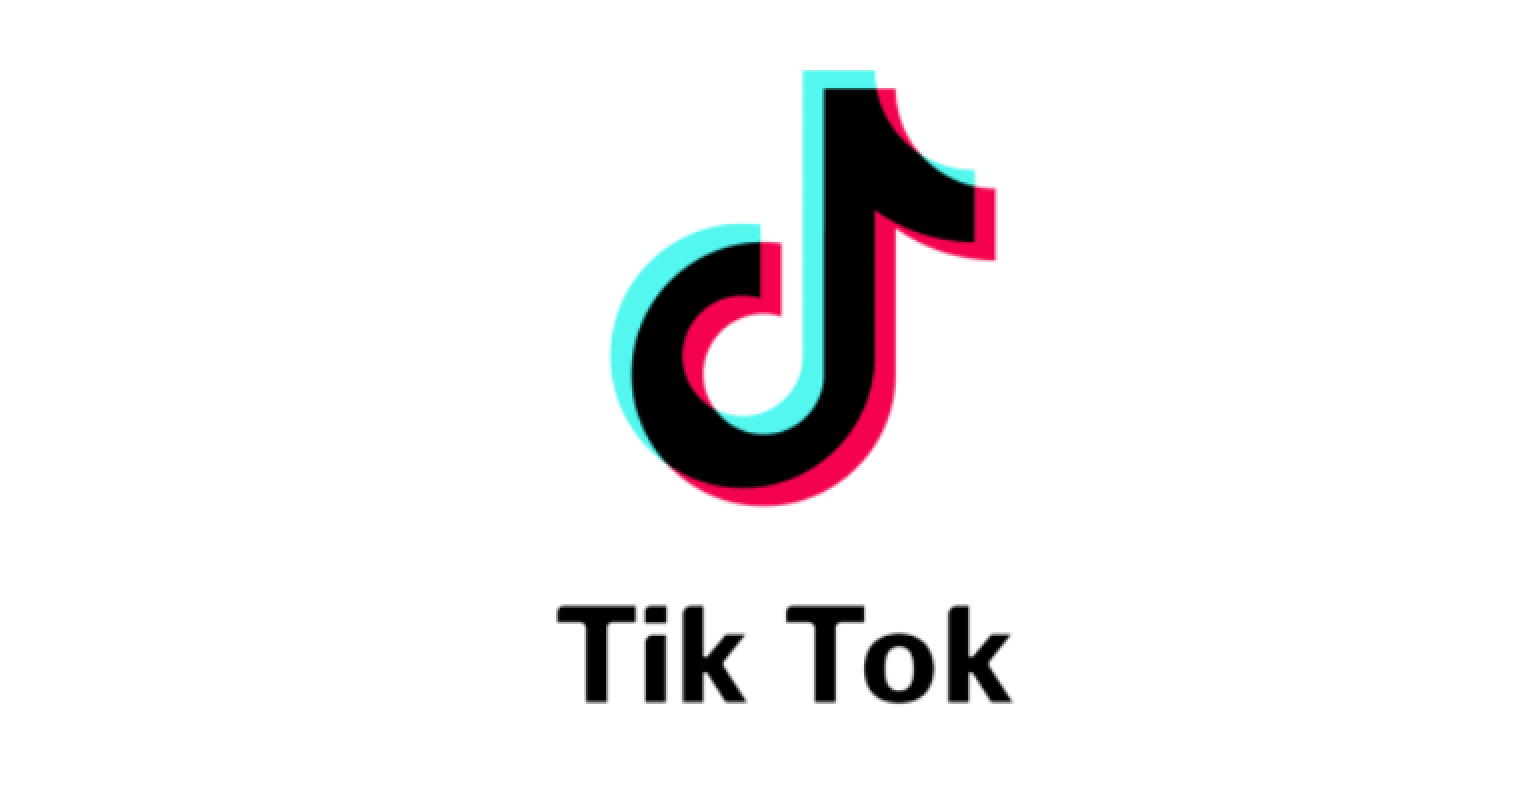 tiktok users launch campaign to unfollow celebrities